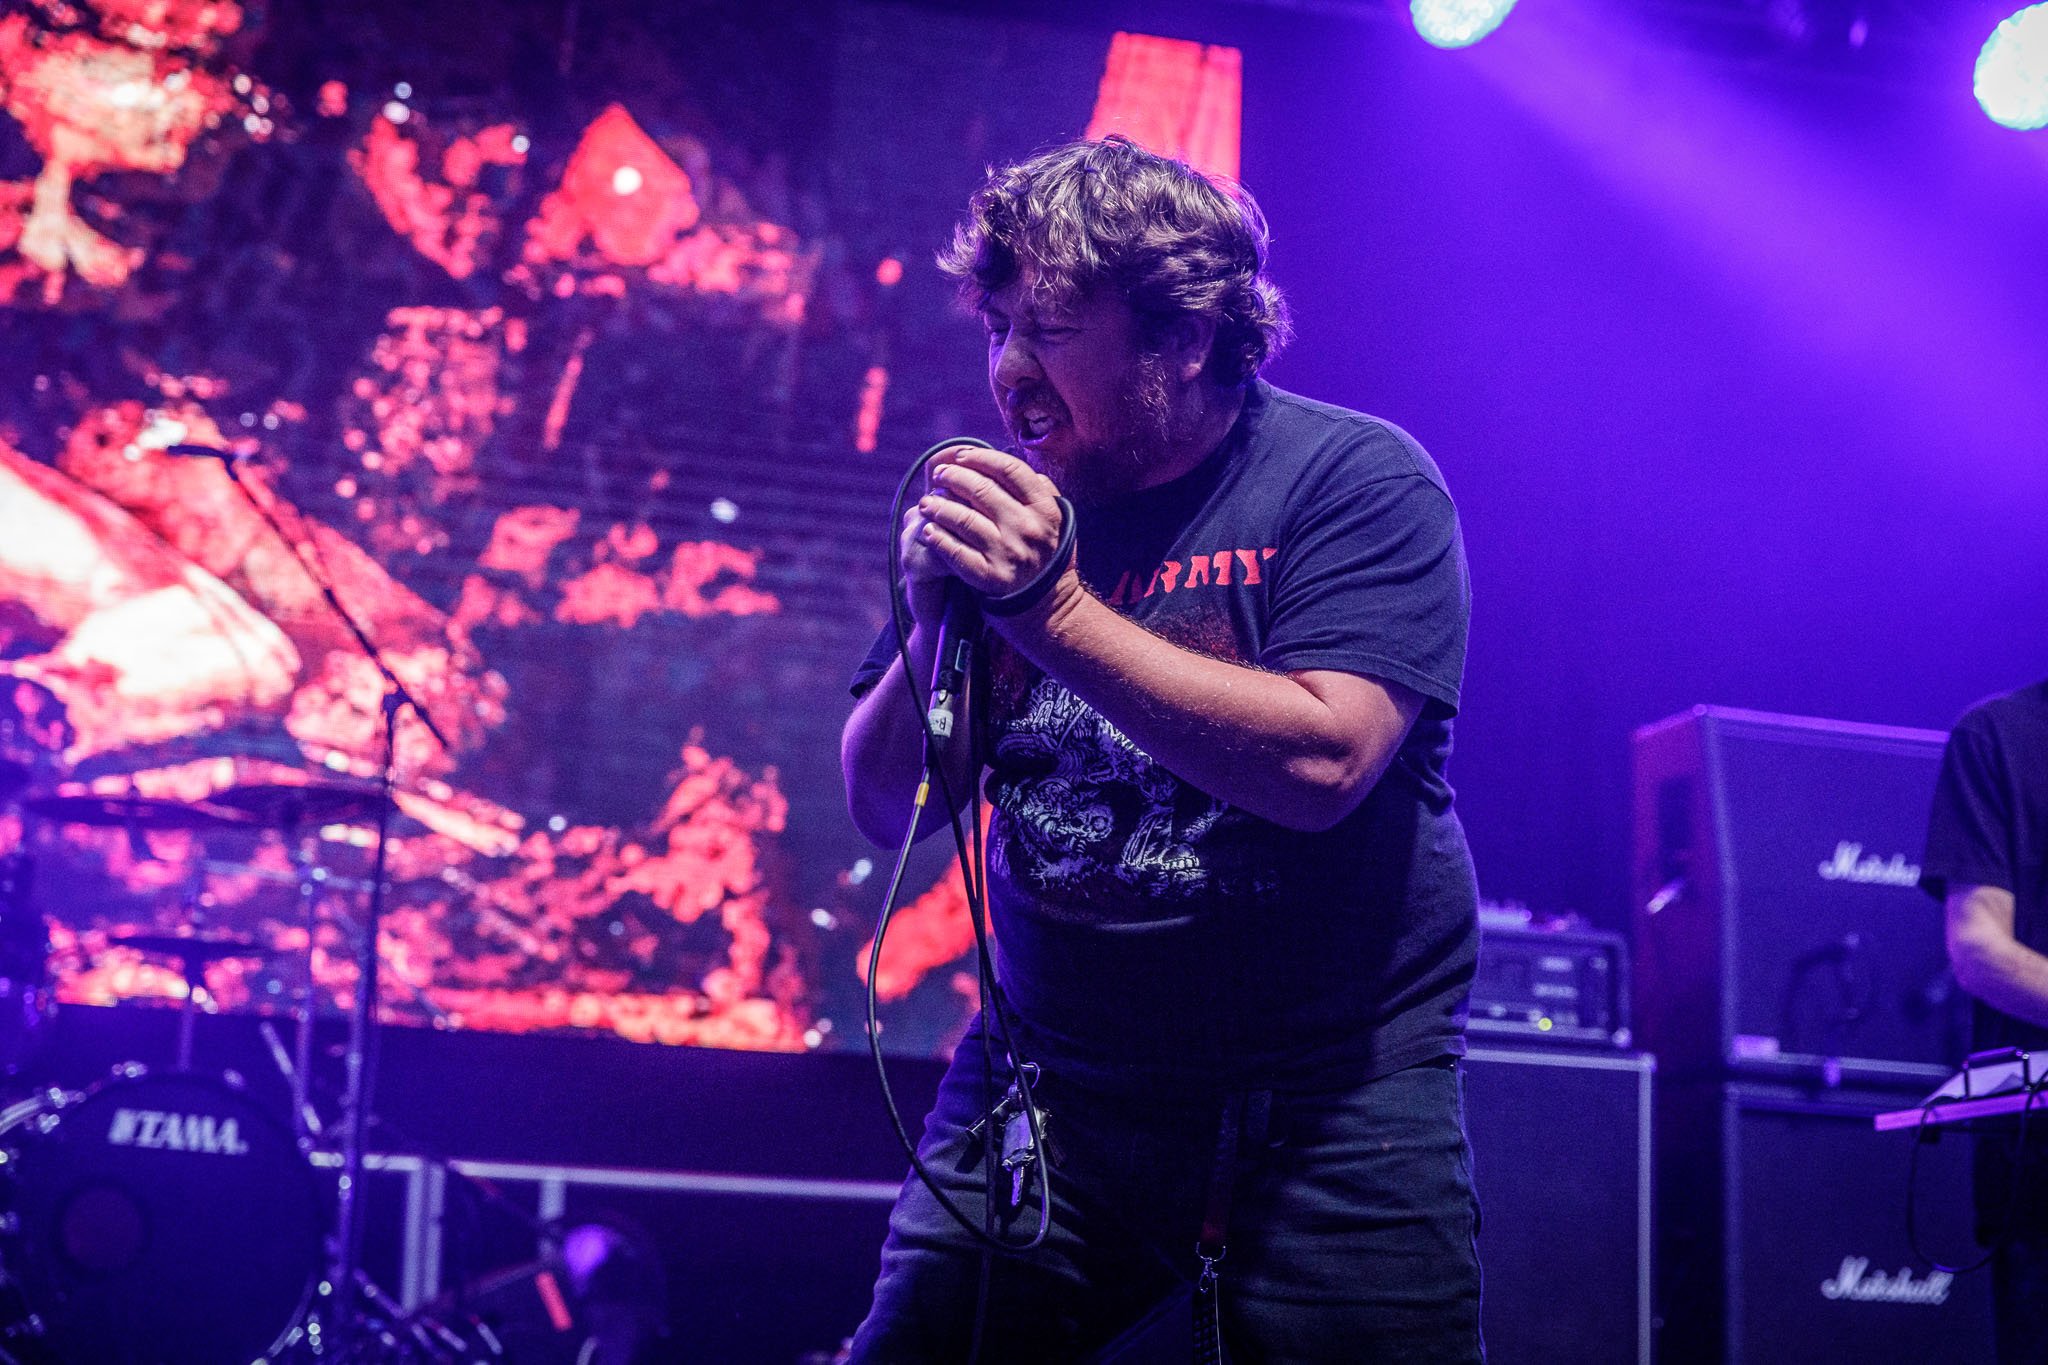 Pig Destroyer at the Damnation Festival in Manchester on Novembe